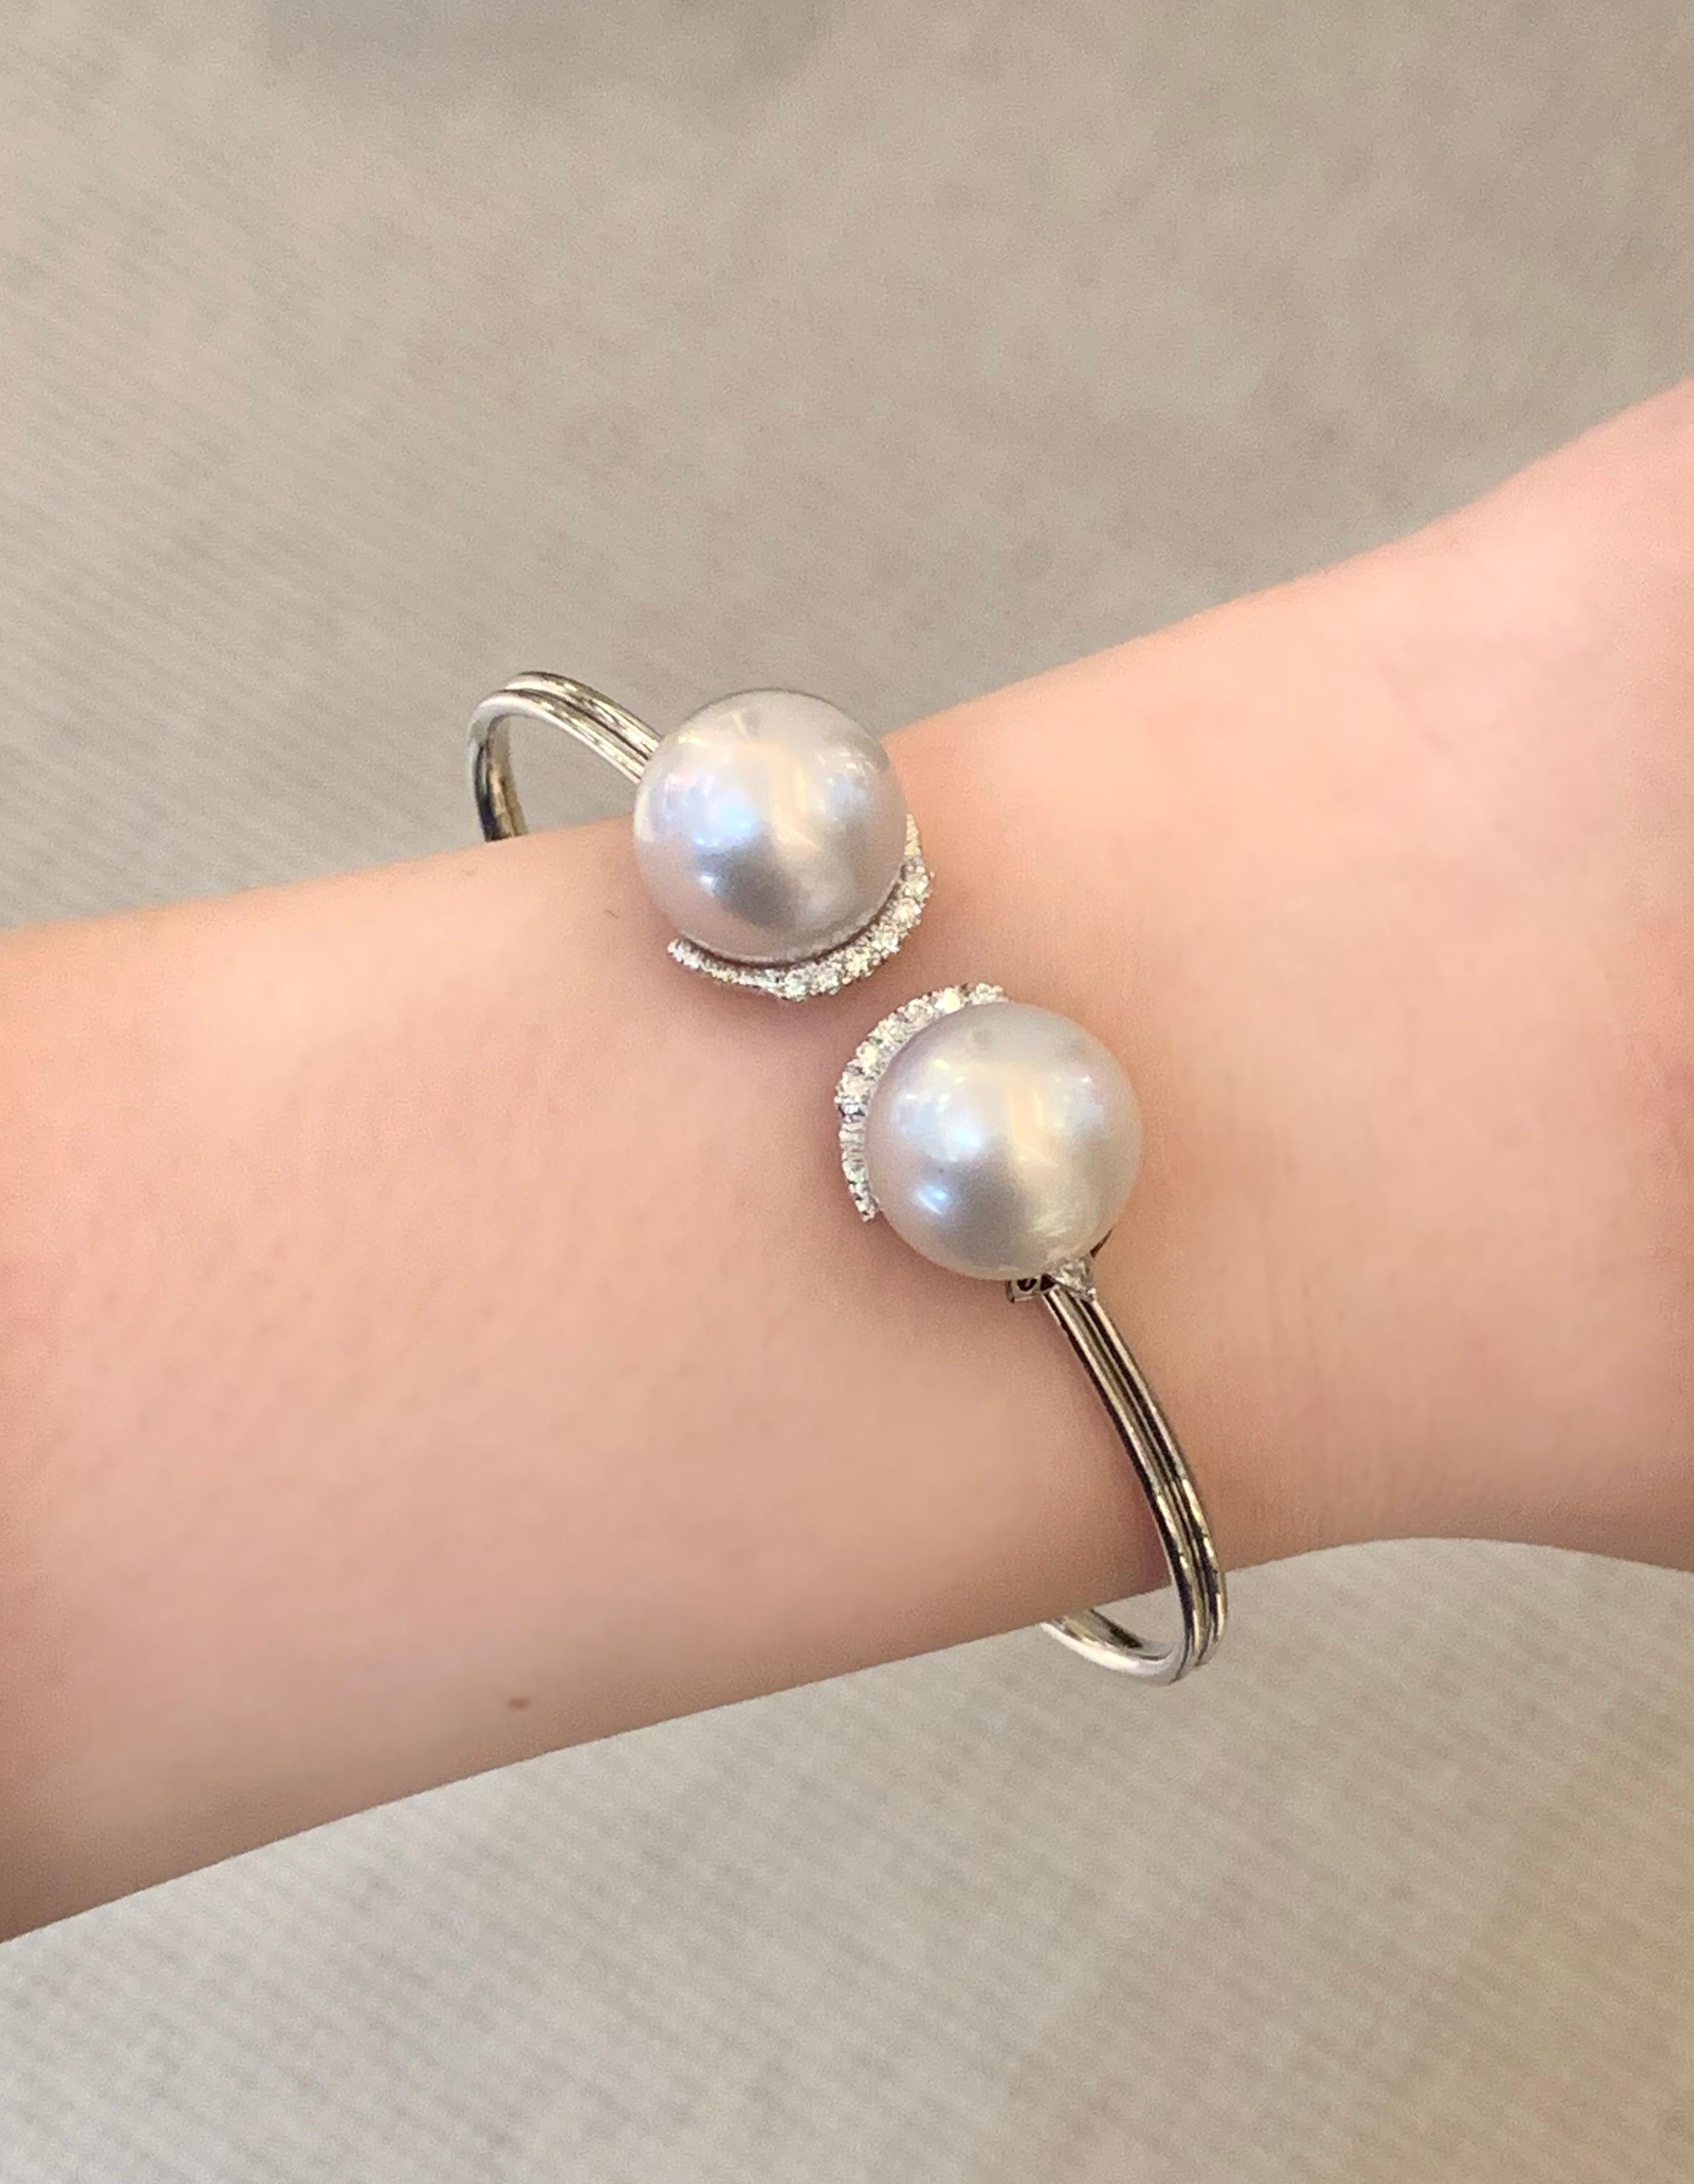 Dilys’ brings back the classic pearls with a simple Art Deco-inspired silhouette in this wearable, no-fuss 18 karat wire bracelet. Made to be bendable, this bracelet can be worn and taken off with ease. The two luscious South Sea Pearls,